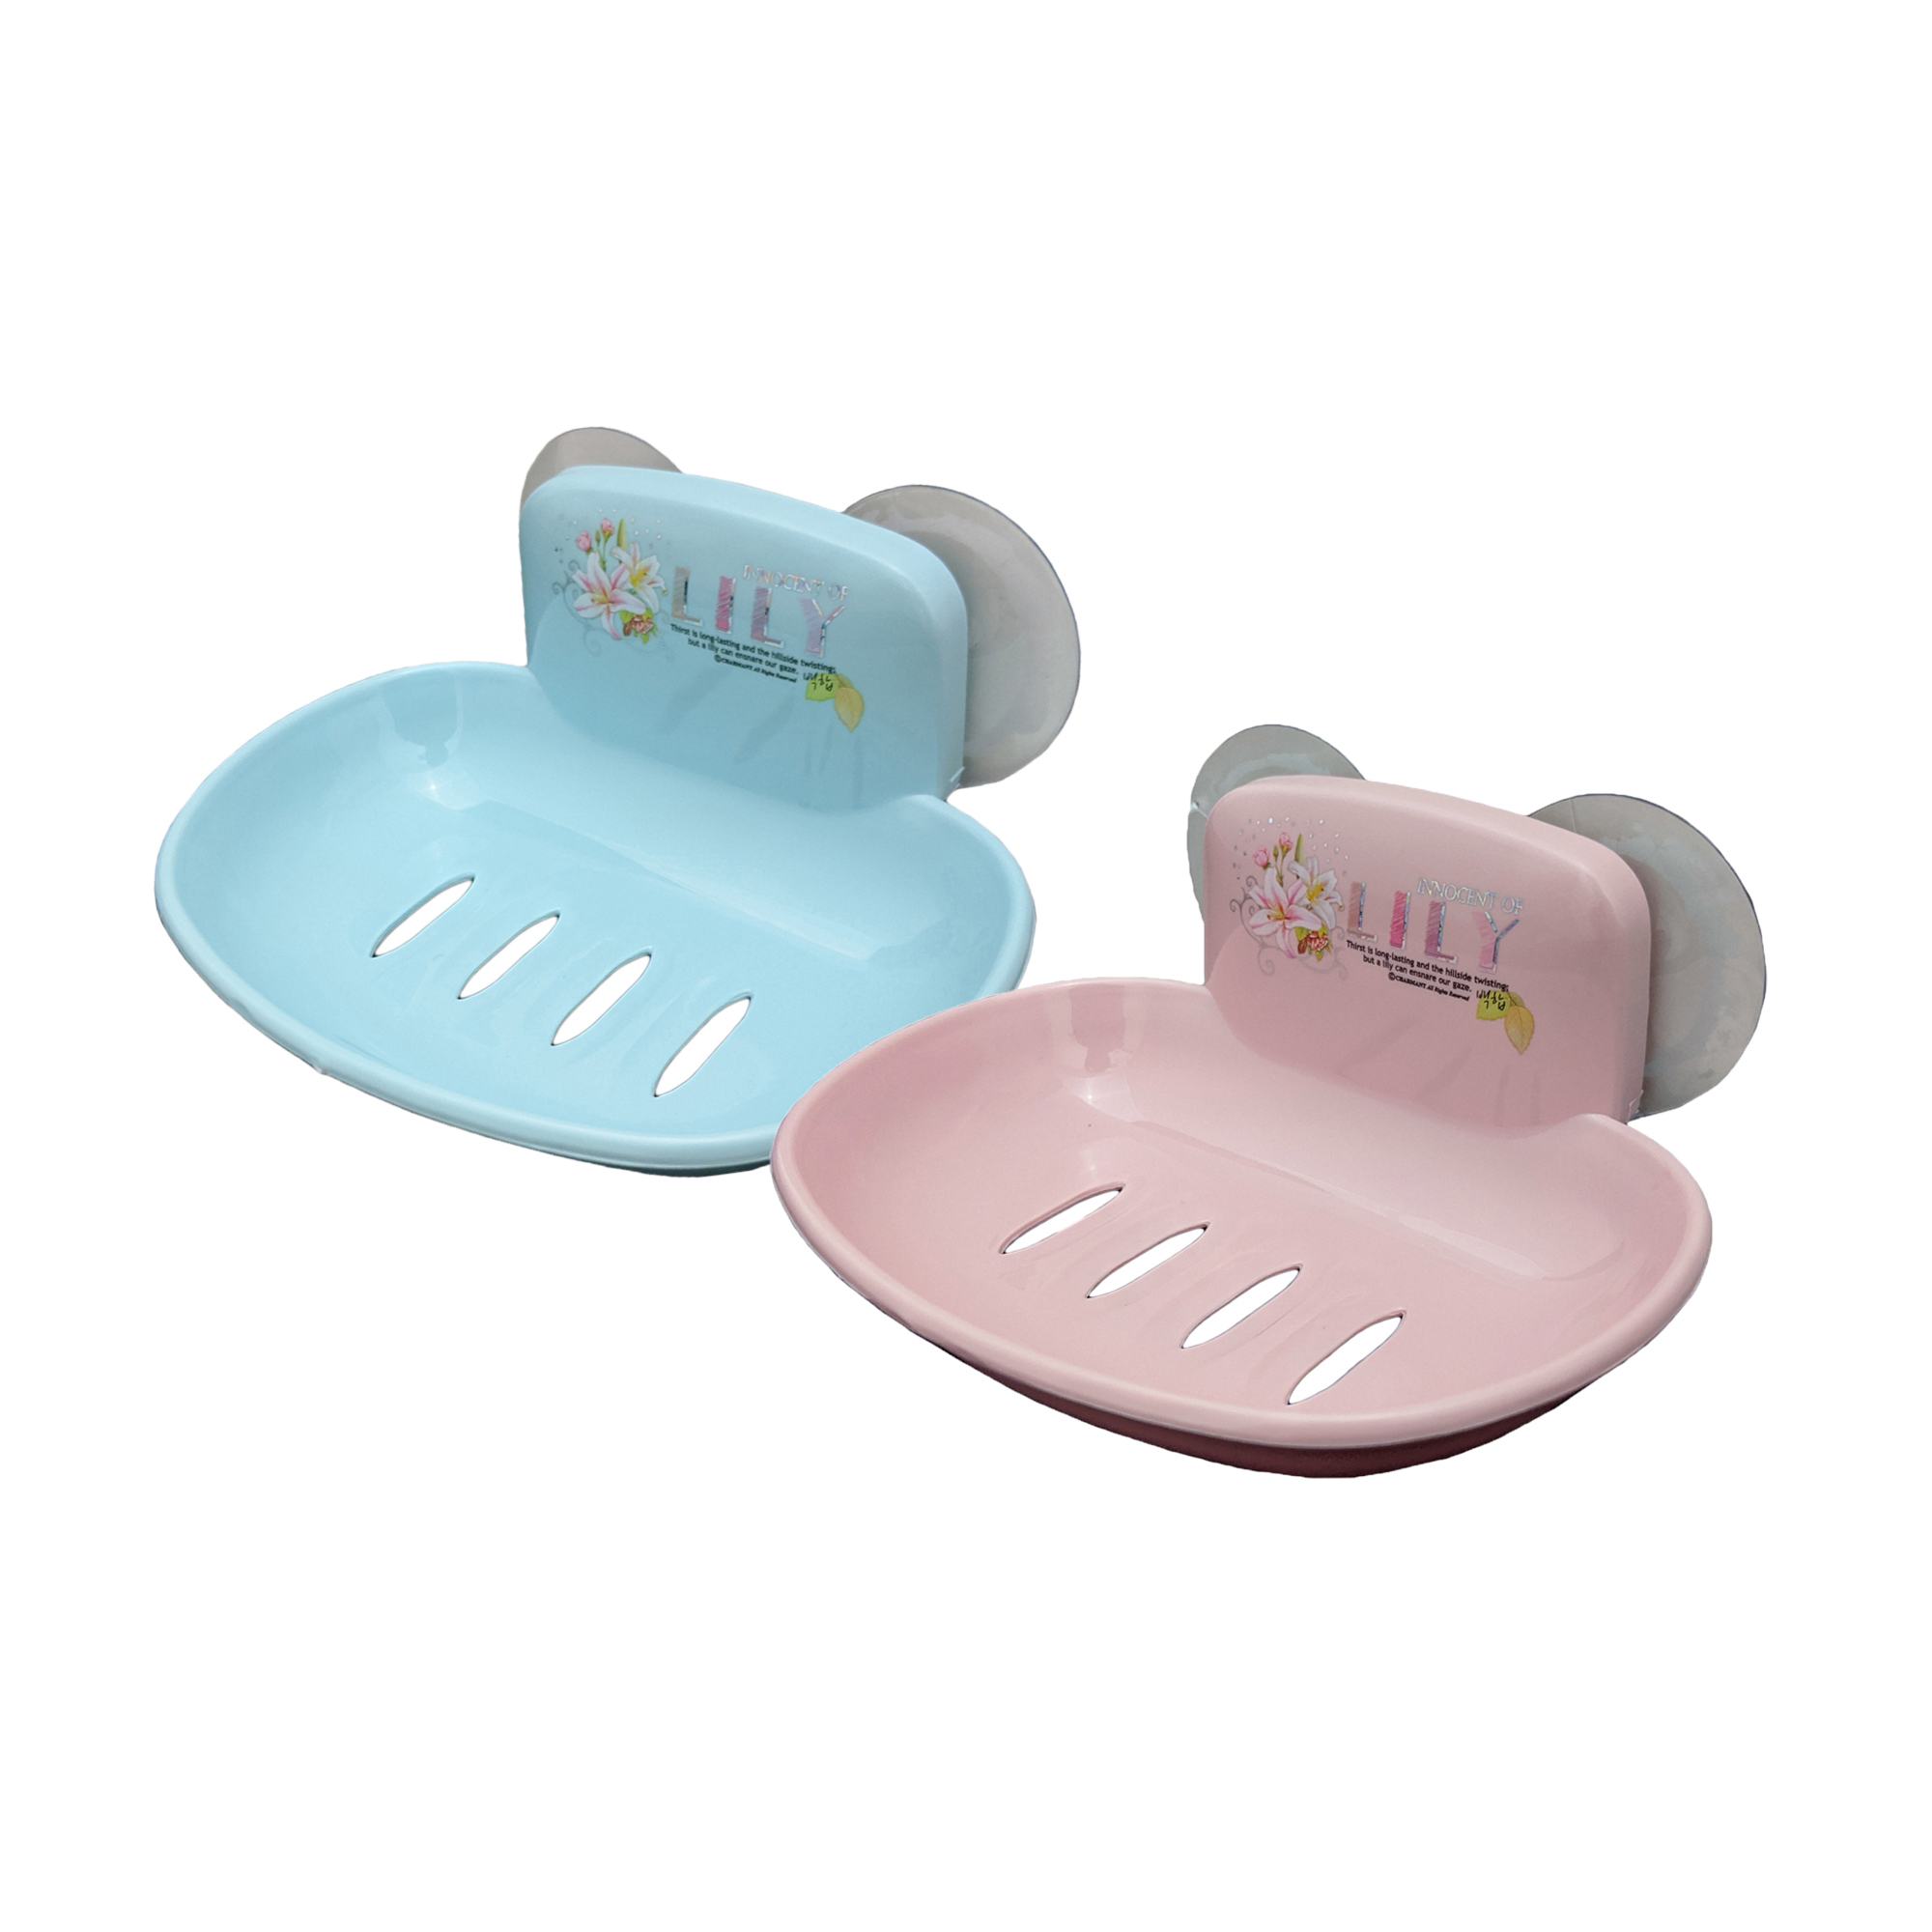 KJB Lily Plastic Soap Holder w/Suction Cups